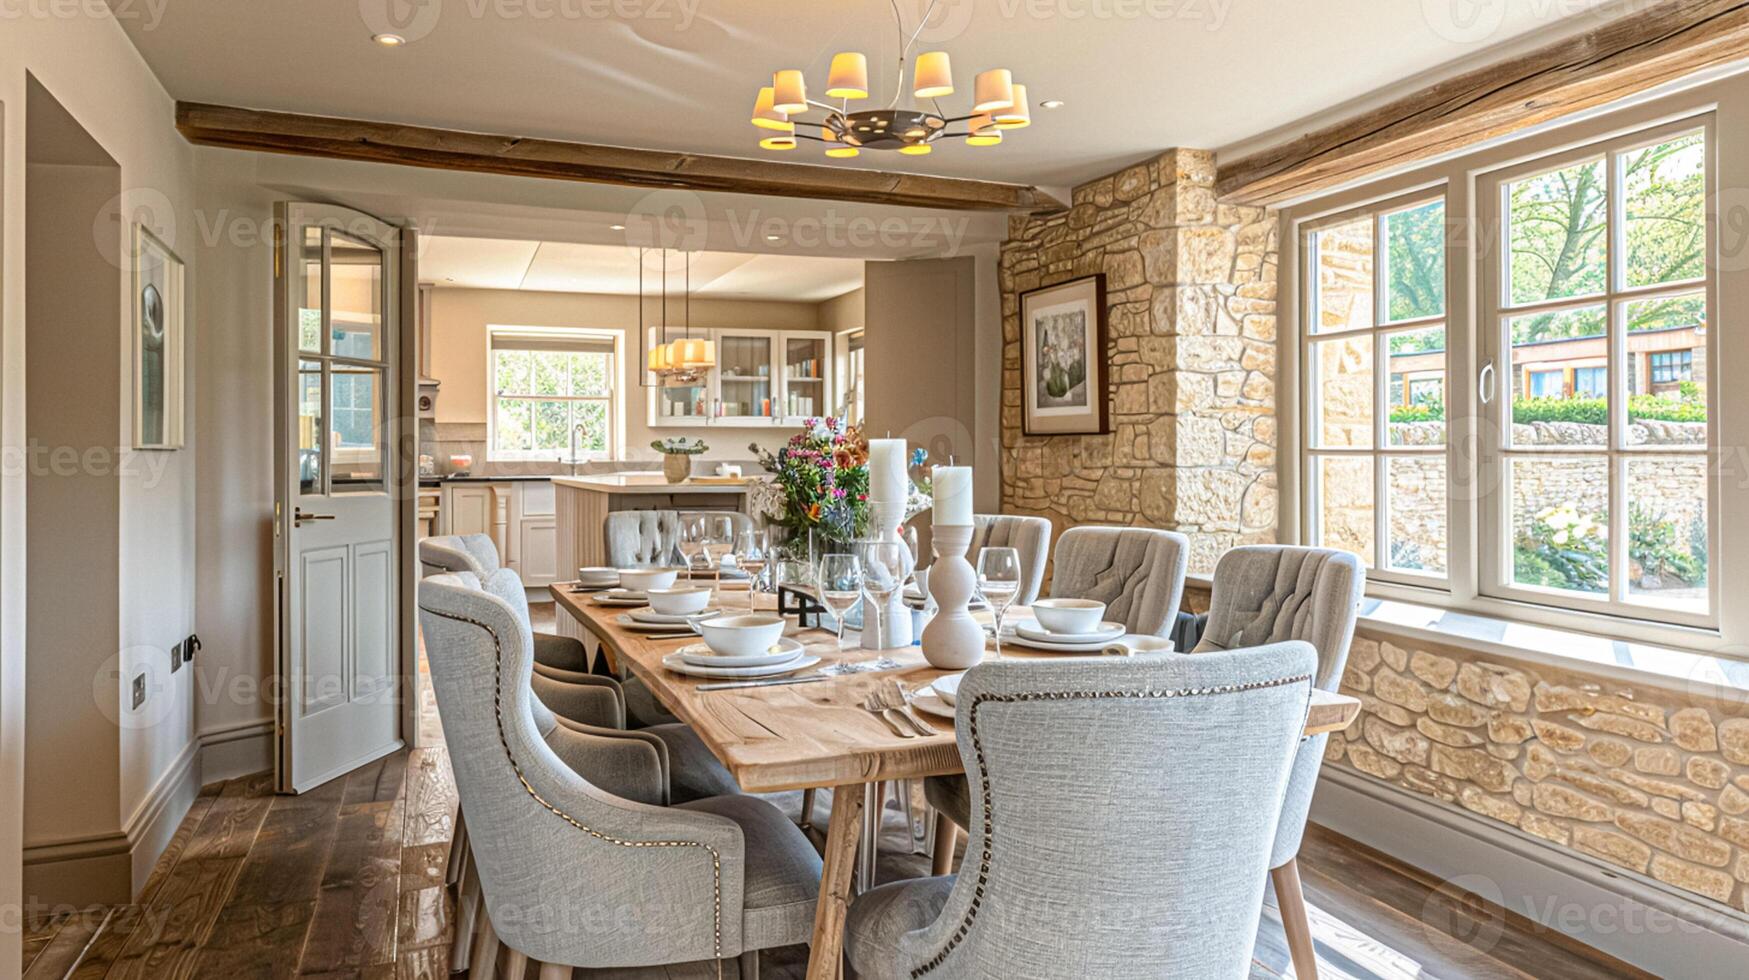 Cotswolds cottage style dining room decor, interior design and country house furniture, home decor, table and chairs, English countryside styling photo